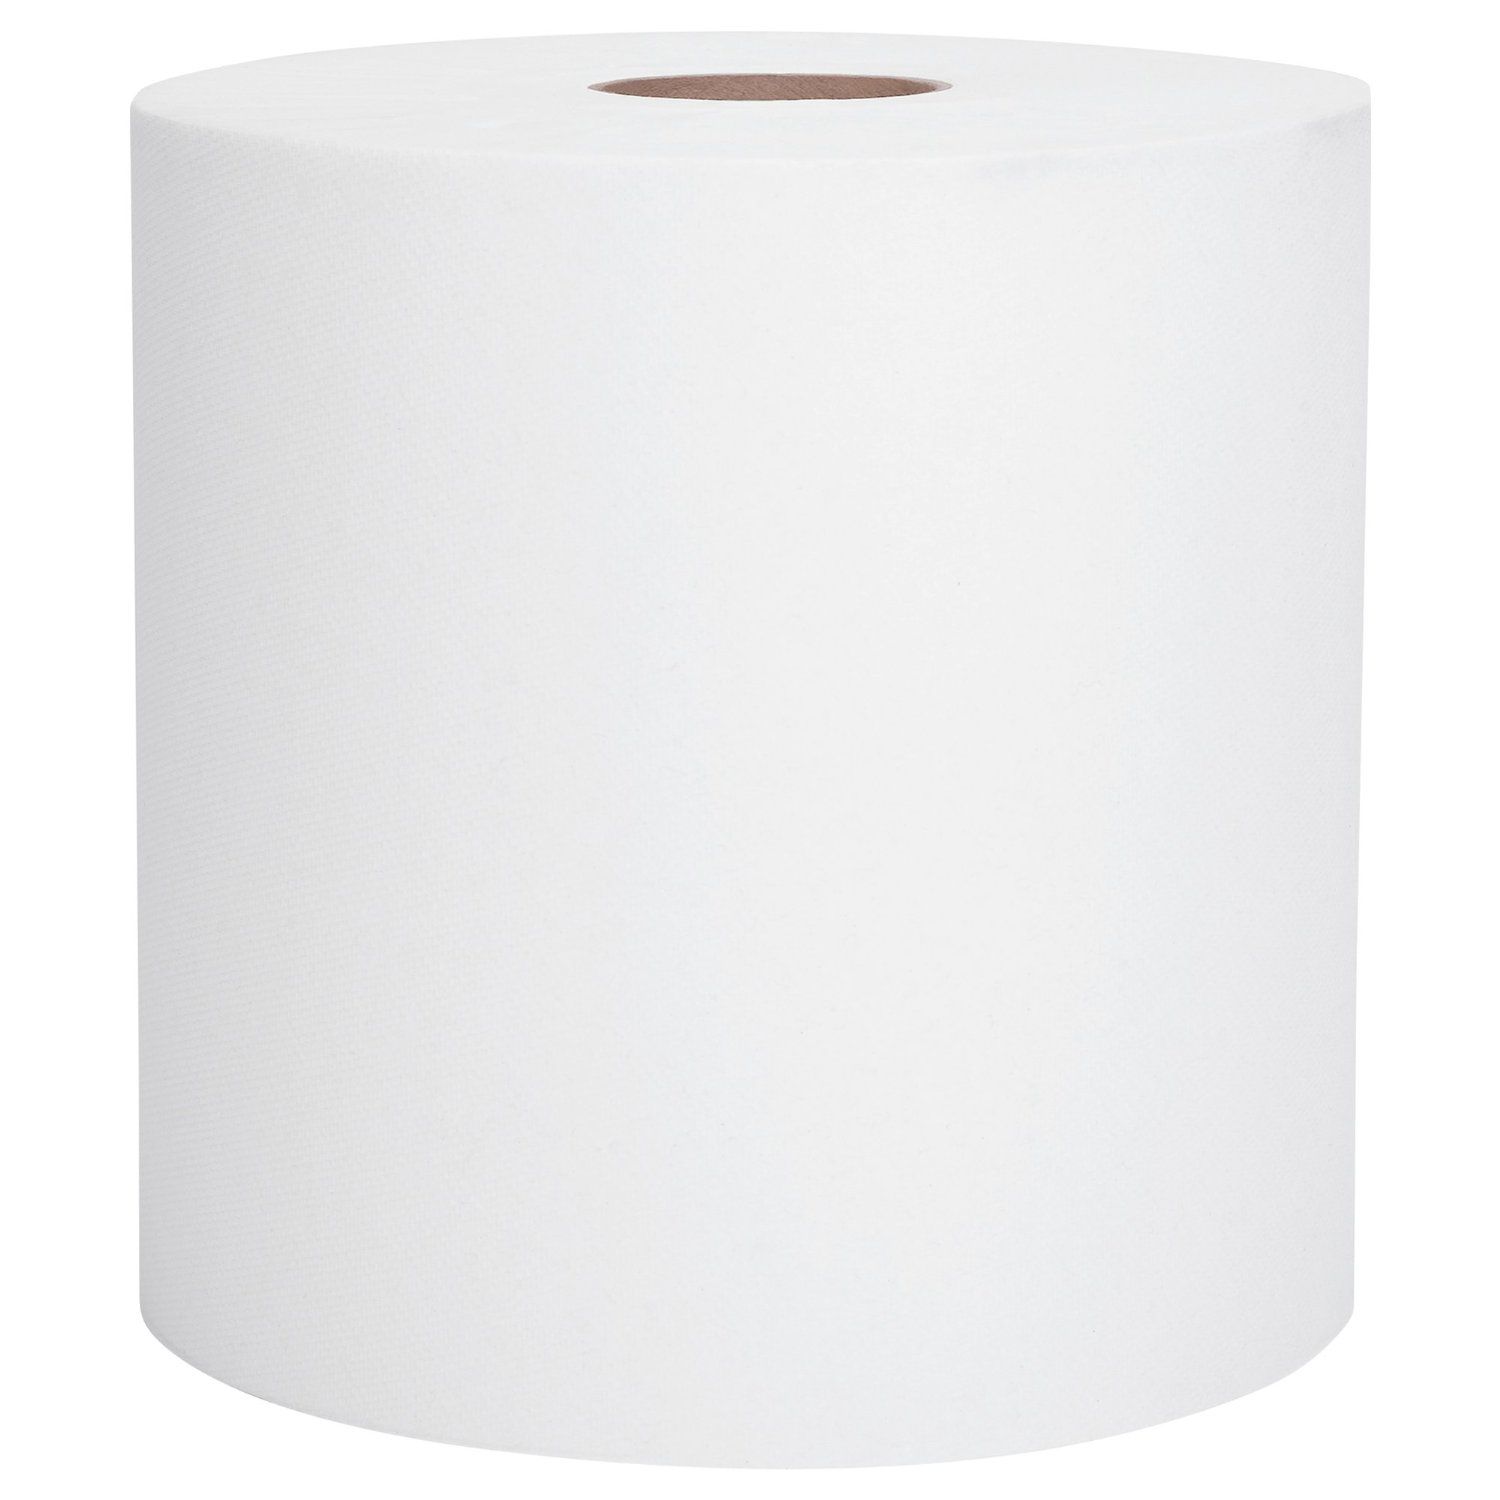 kimberly clark restroom paper products